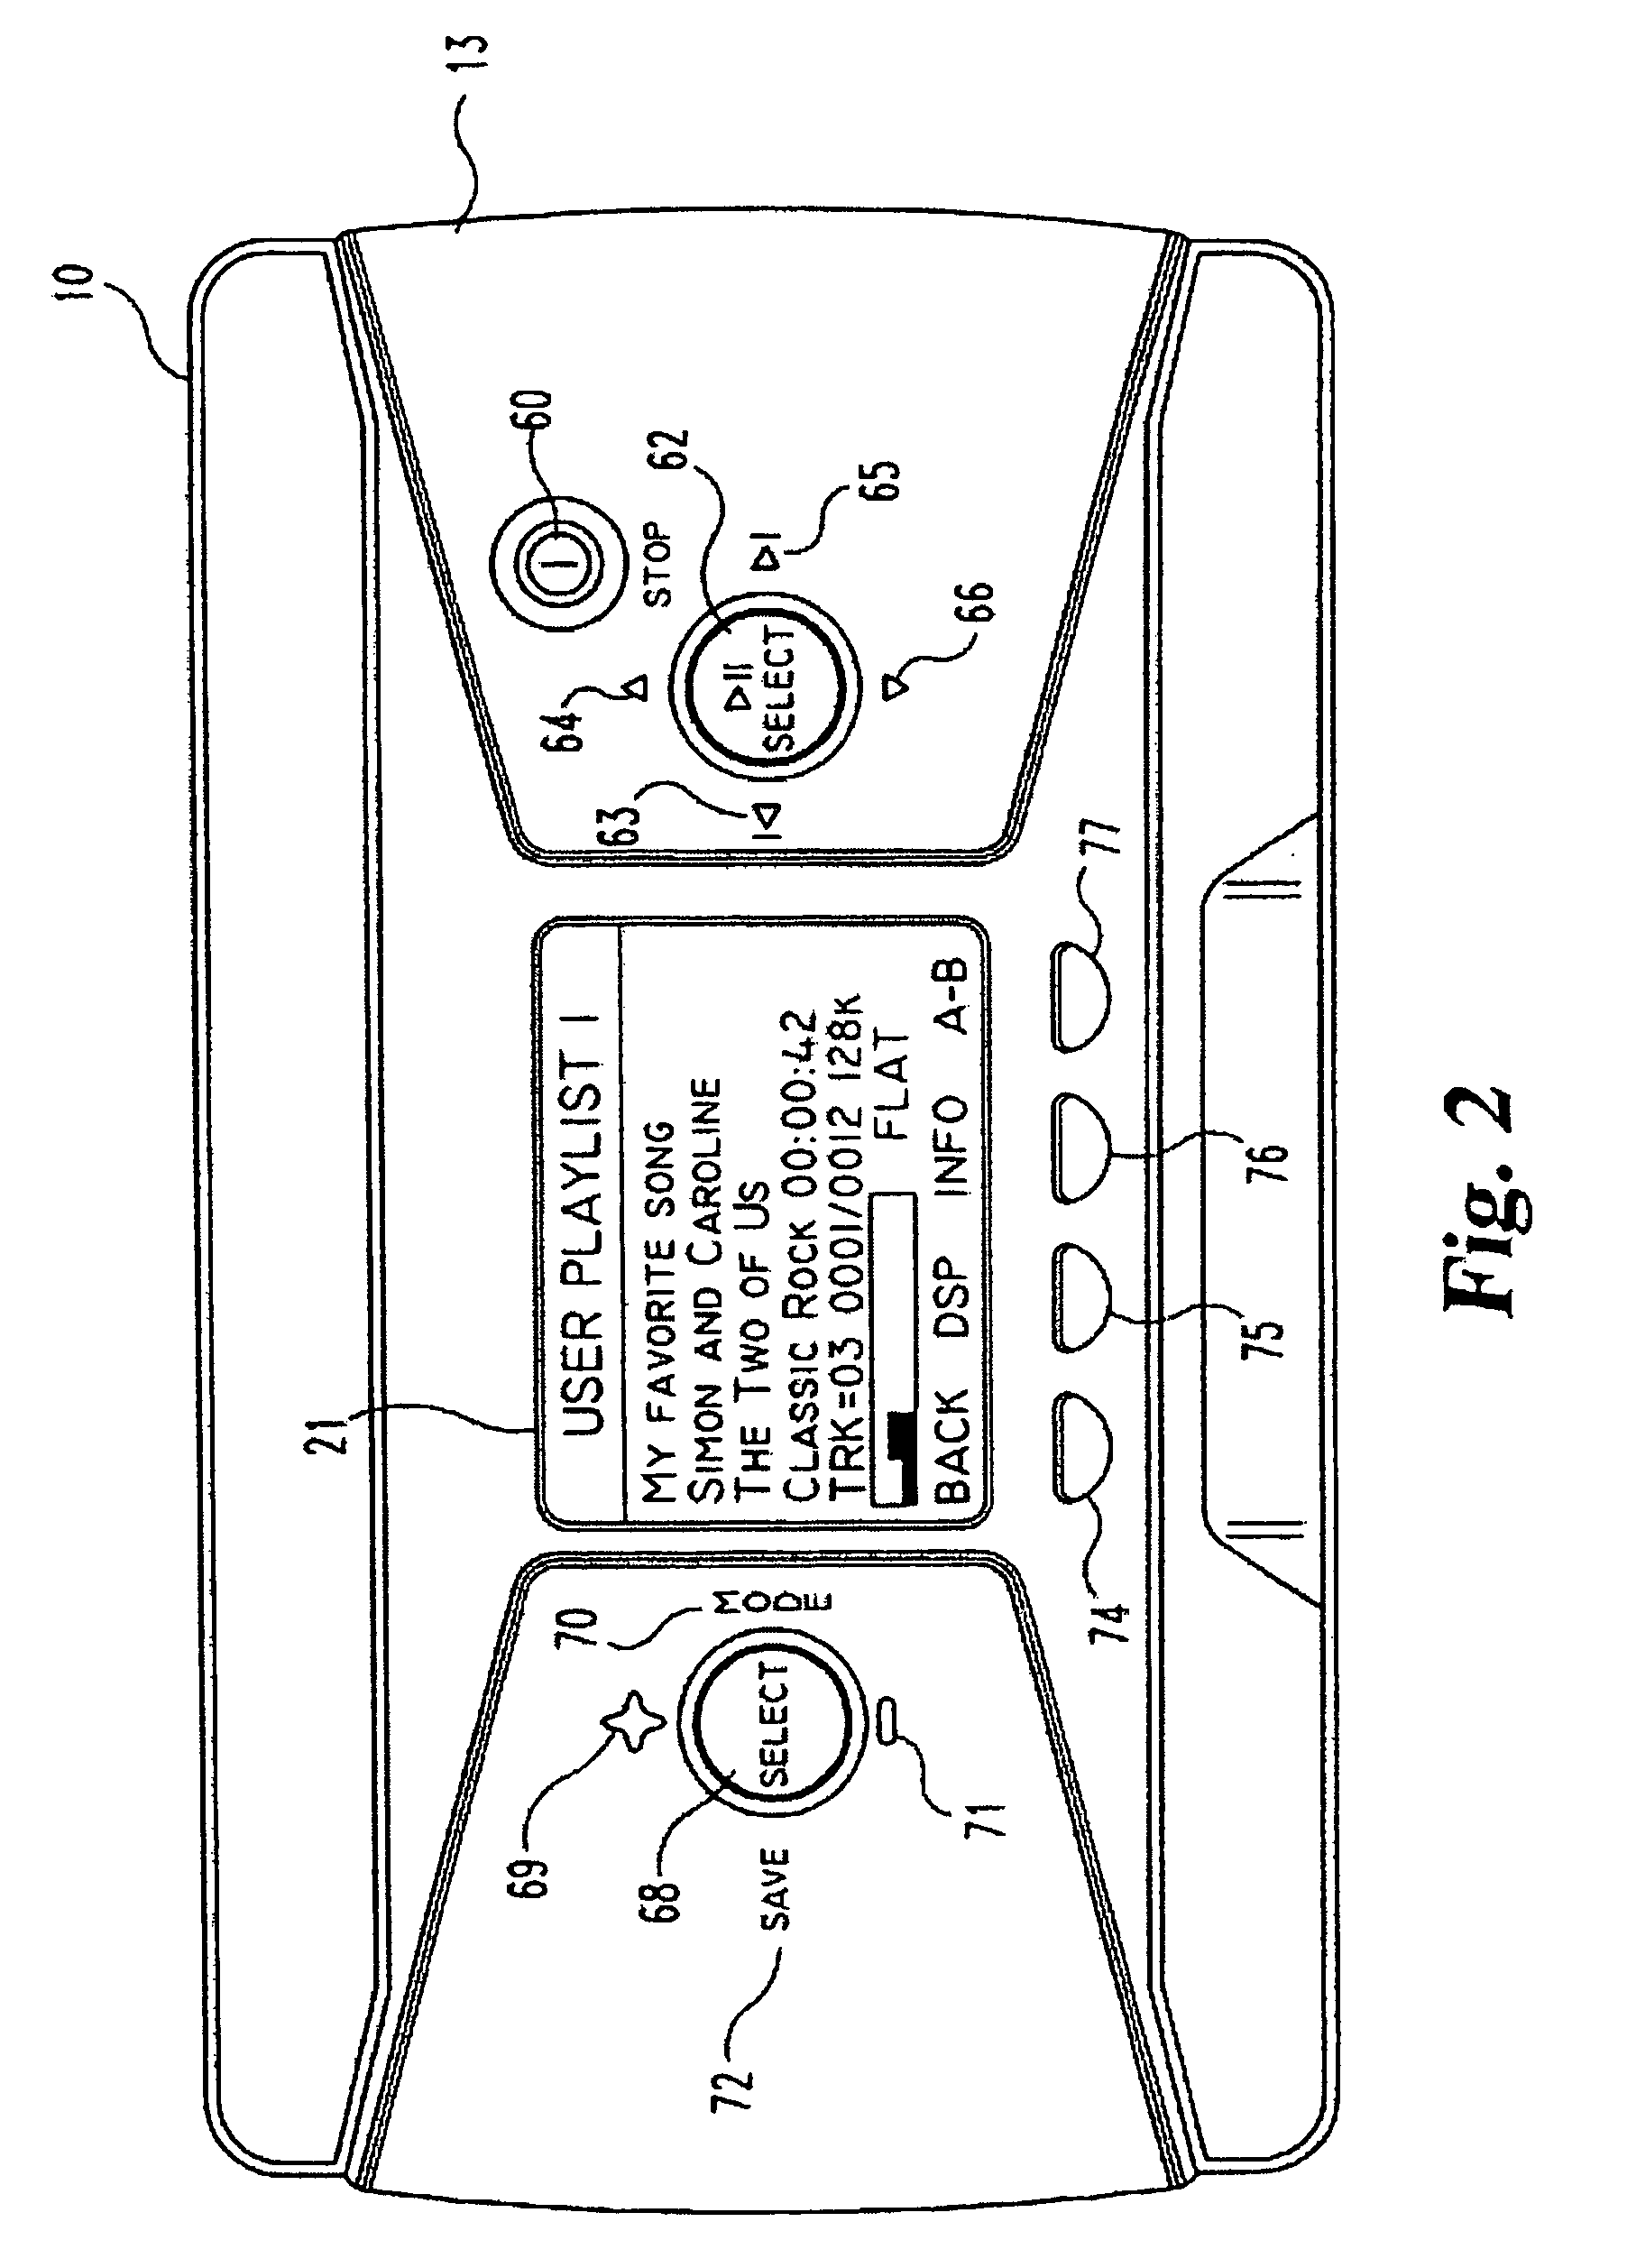 Method and apparatus for elapsed playback timekeeping of variable bit-rate digitally encoded audio data files